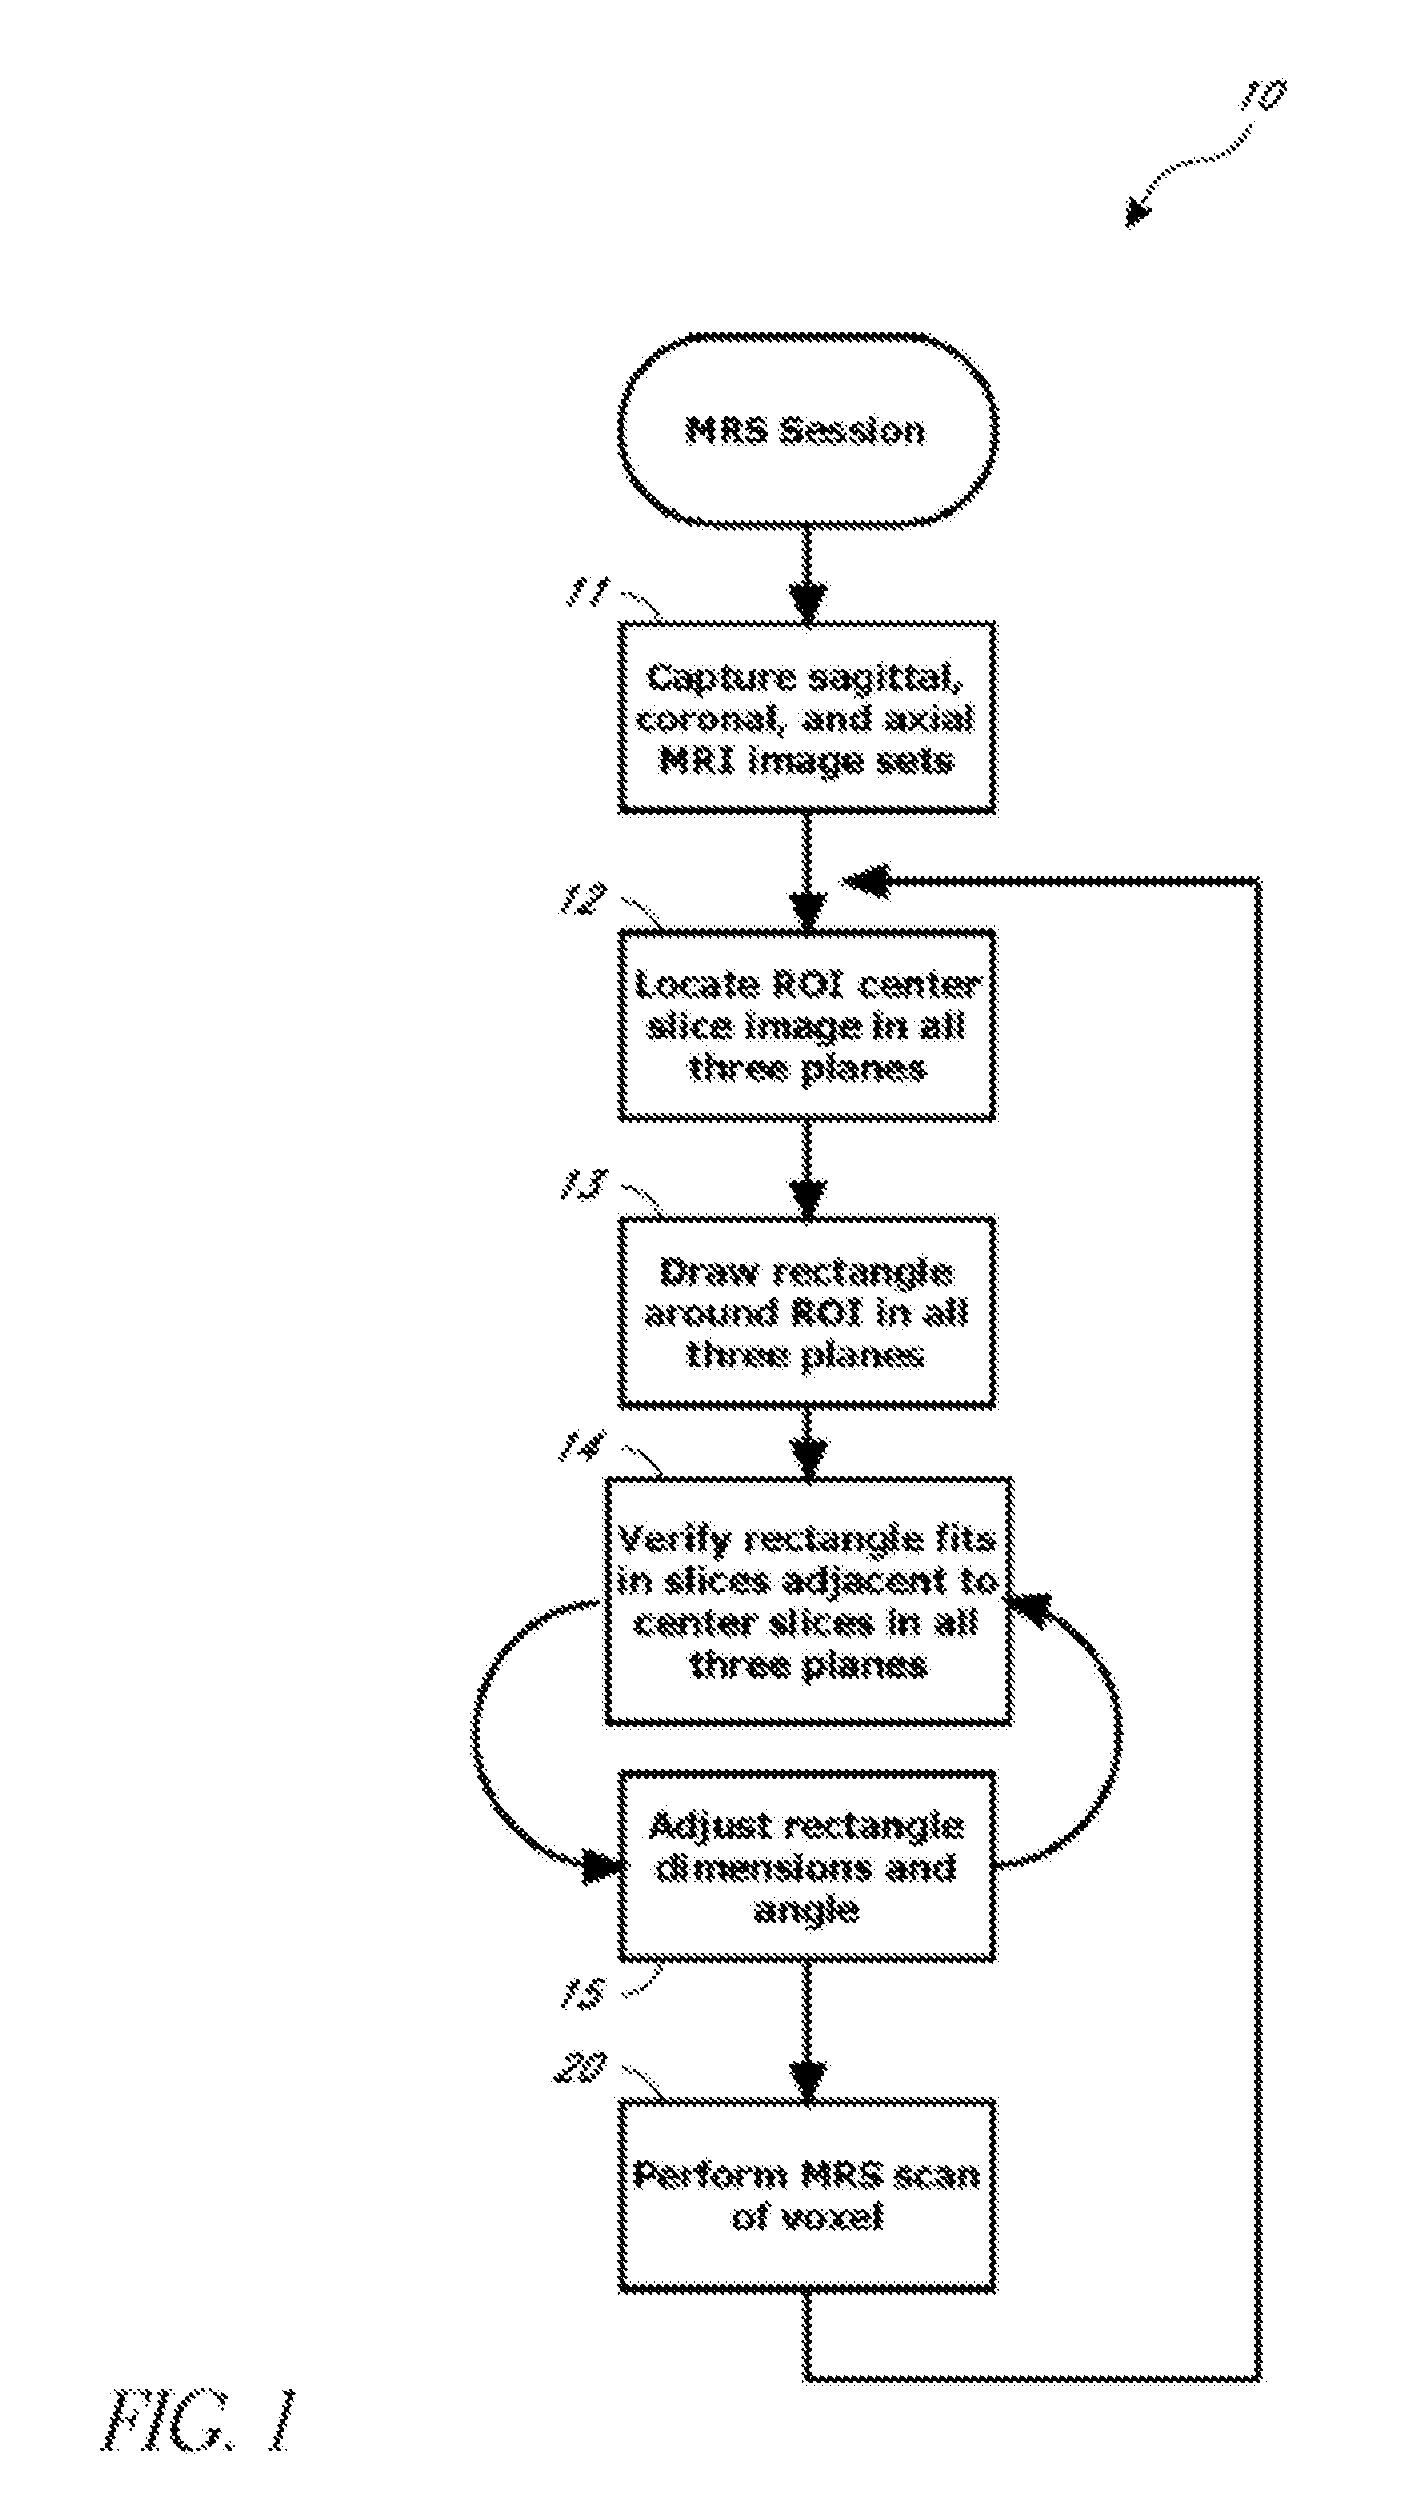 Systems and methods for automated voxelation of regions of interest for magnetic resonance spectroscopy